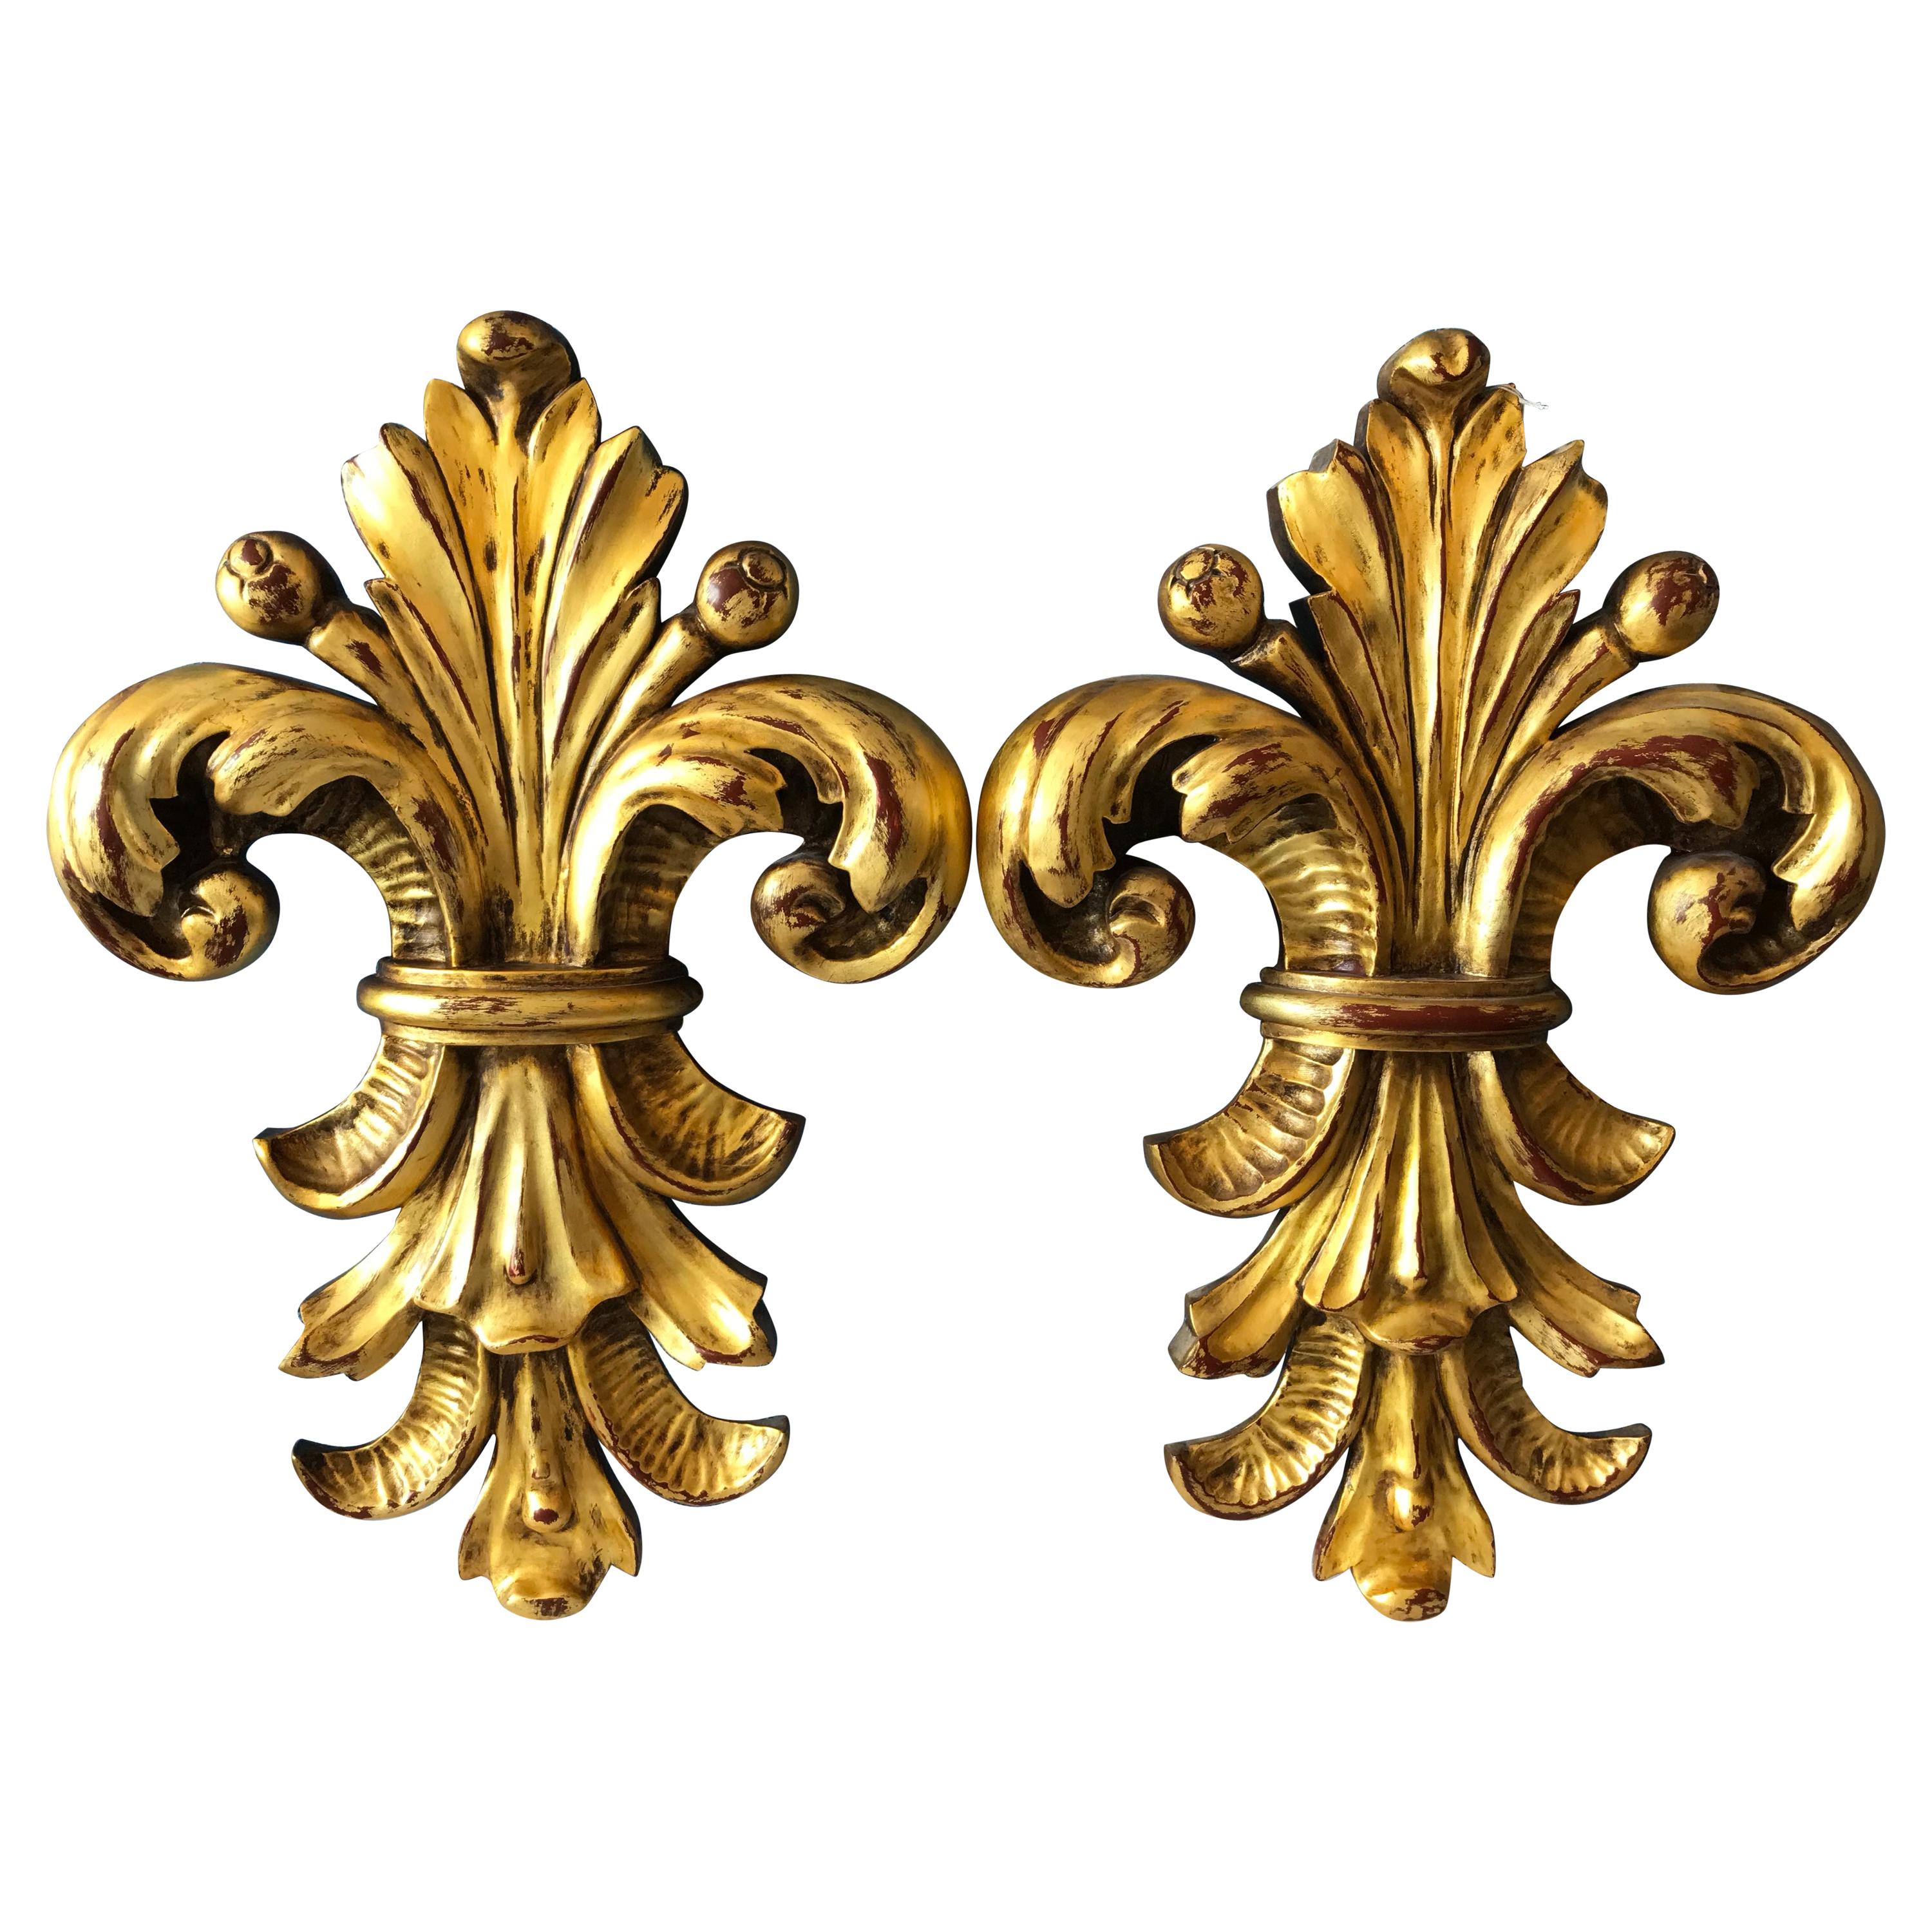 Pair of Gilded Carved Wood Wall Mount Fleur De Lis